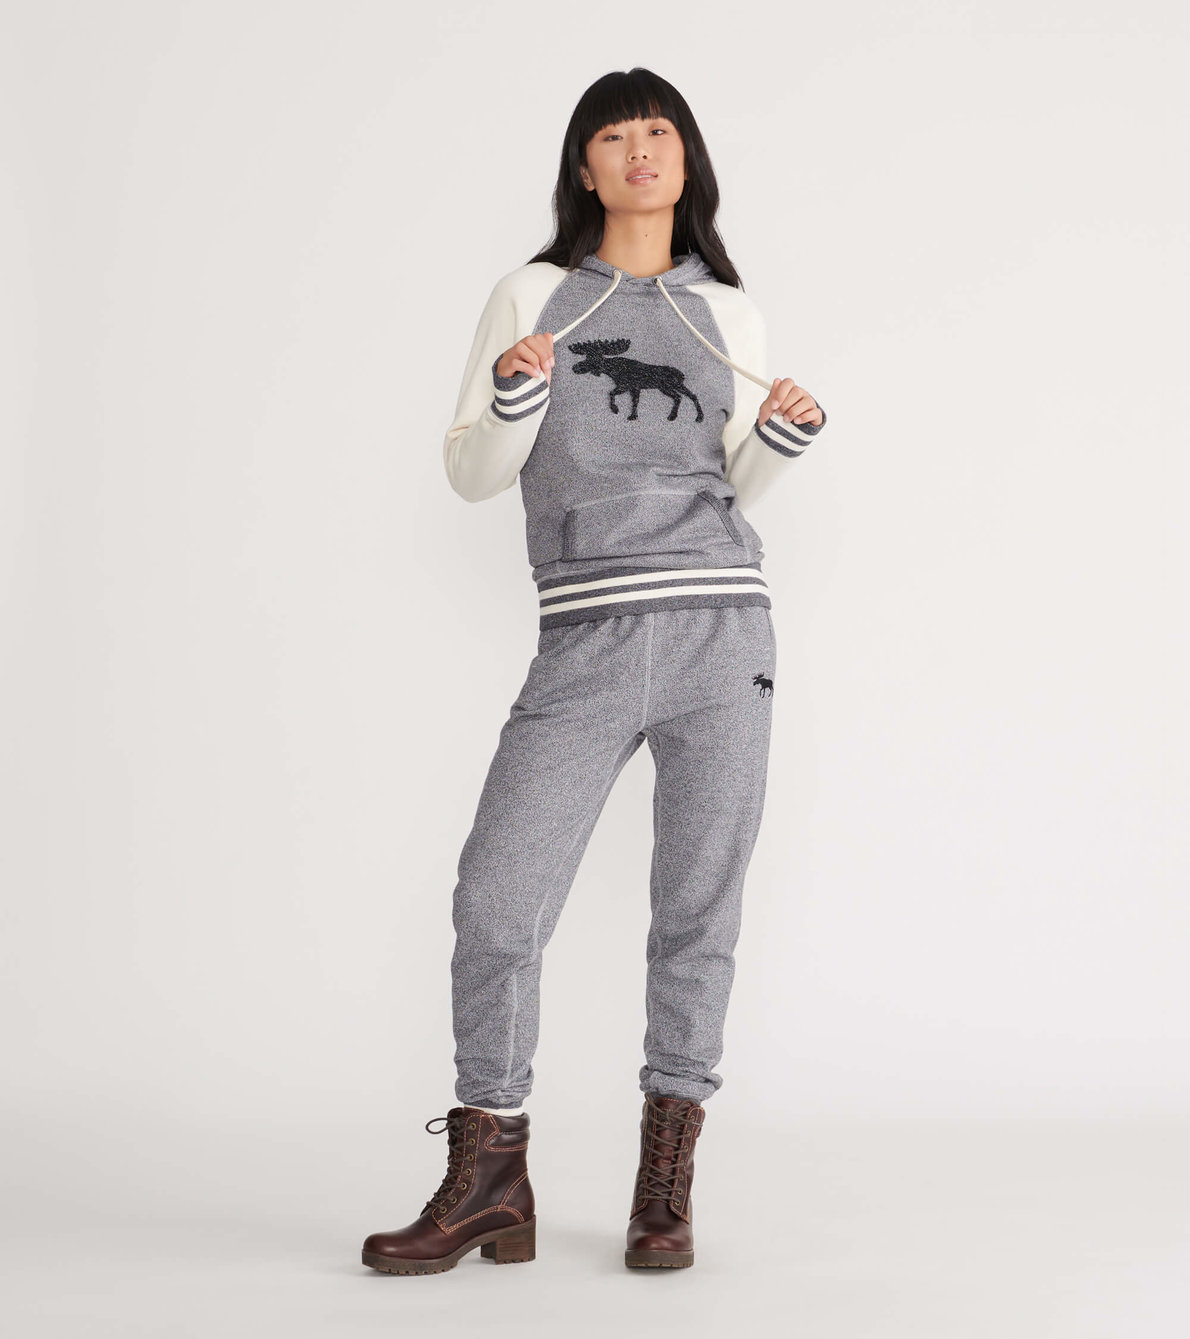 View larger image of Marled Grey Moose Women's Heritage Separates with Pullover Hoodie